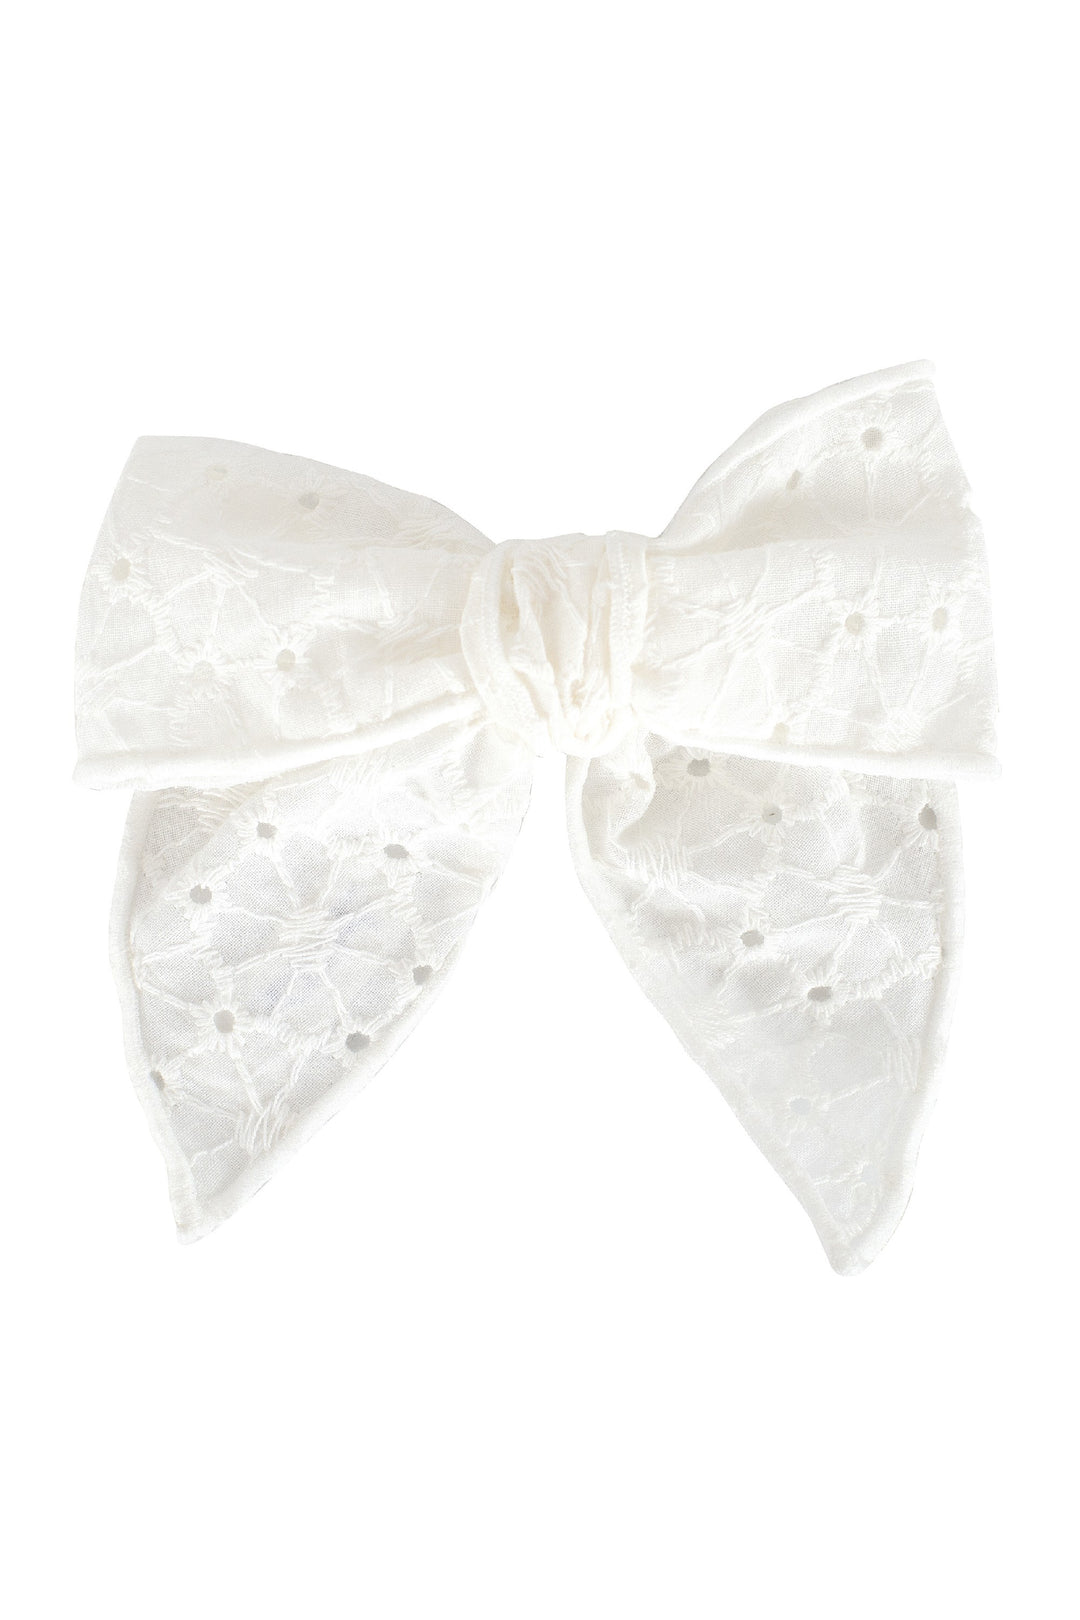 Calamaro White Broderie Anglaise Hair Bow | Millie and John